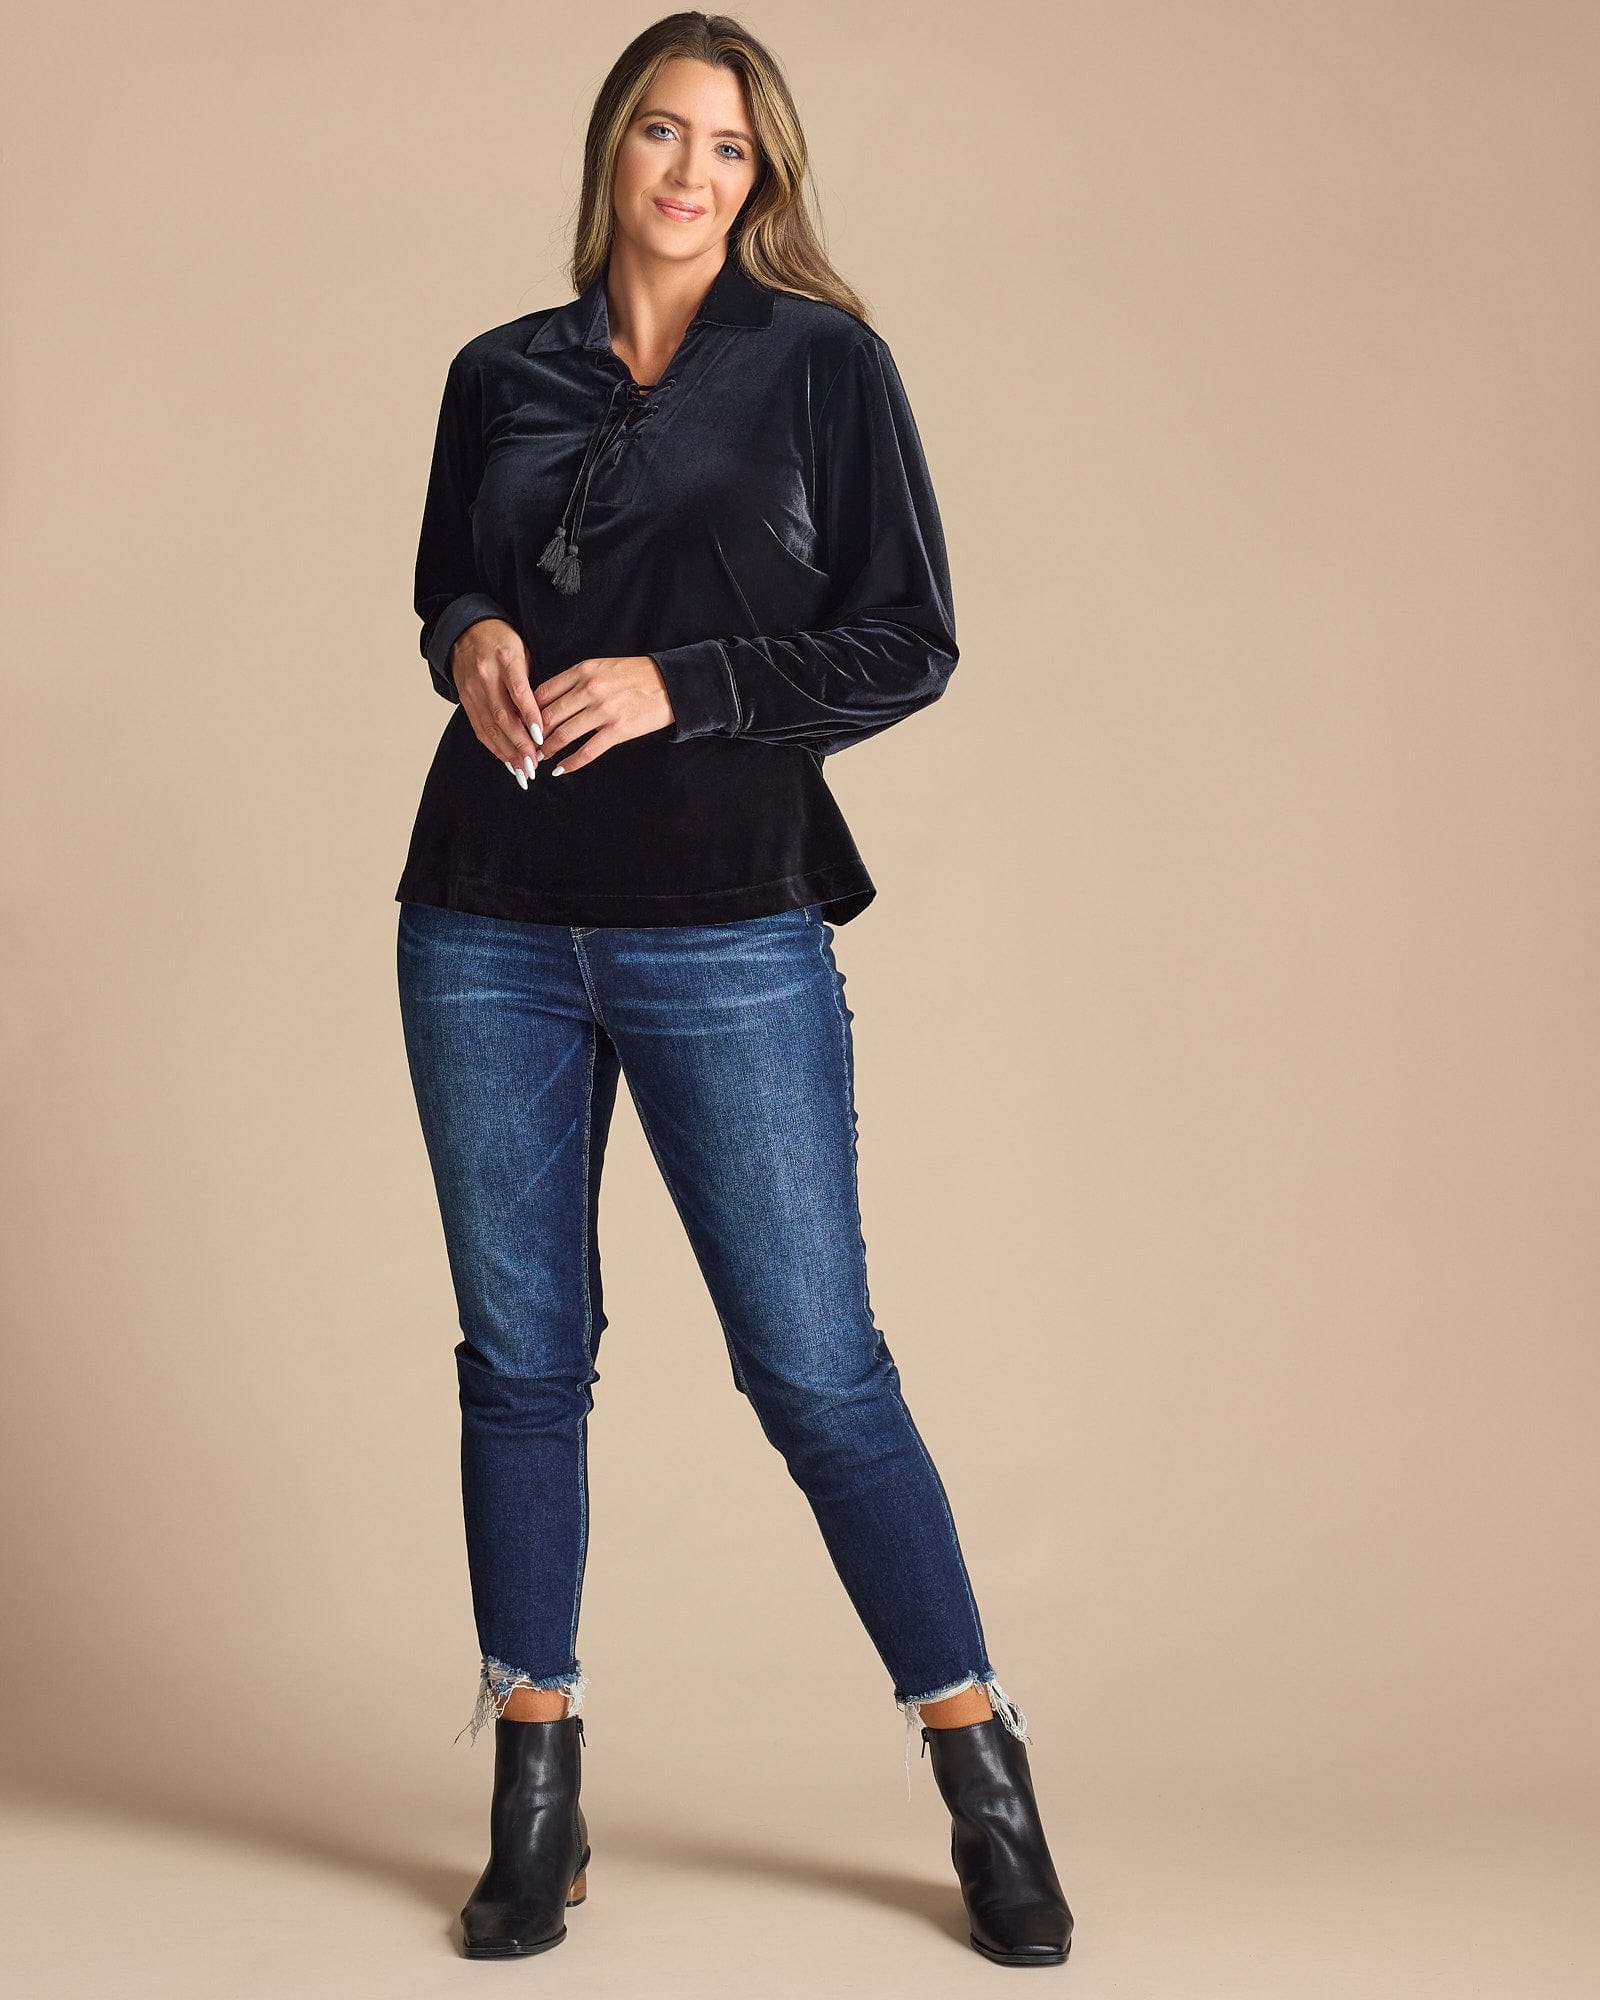 Woman in a black long sleeve blouse